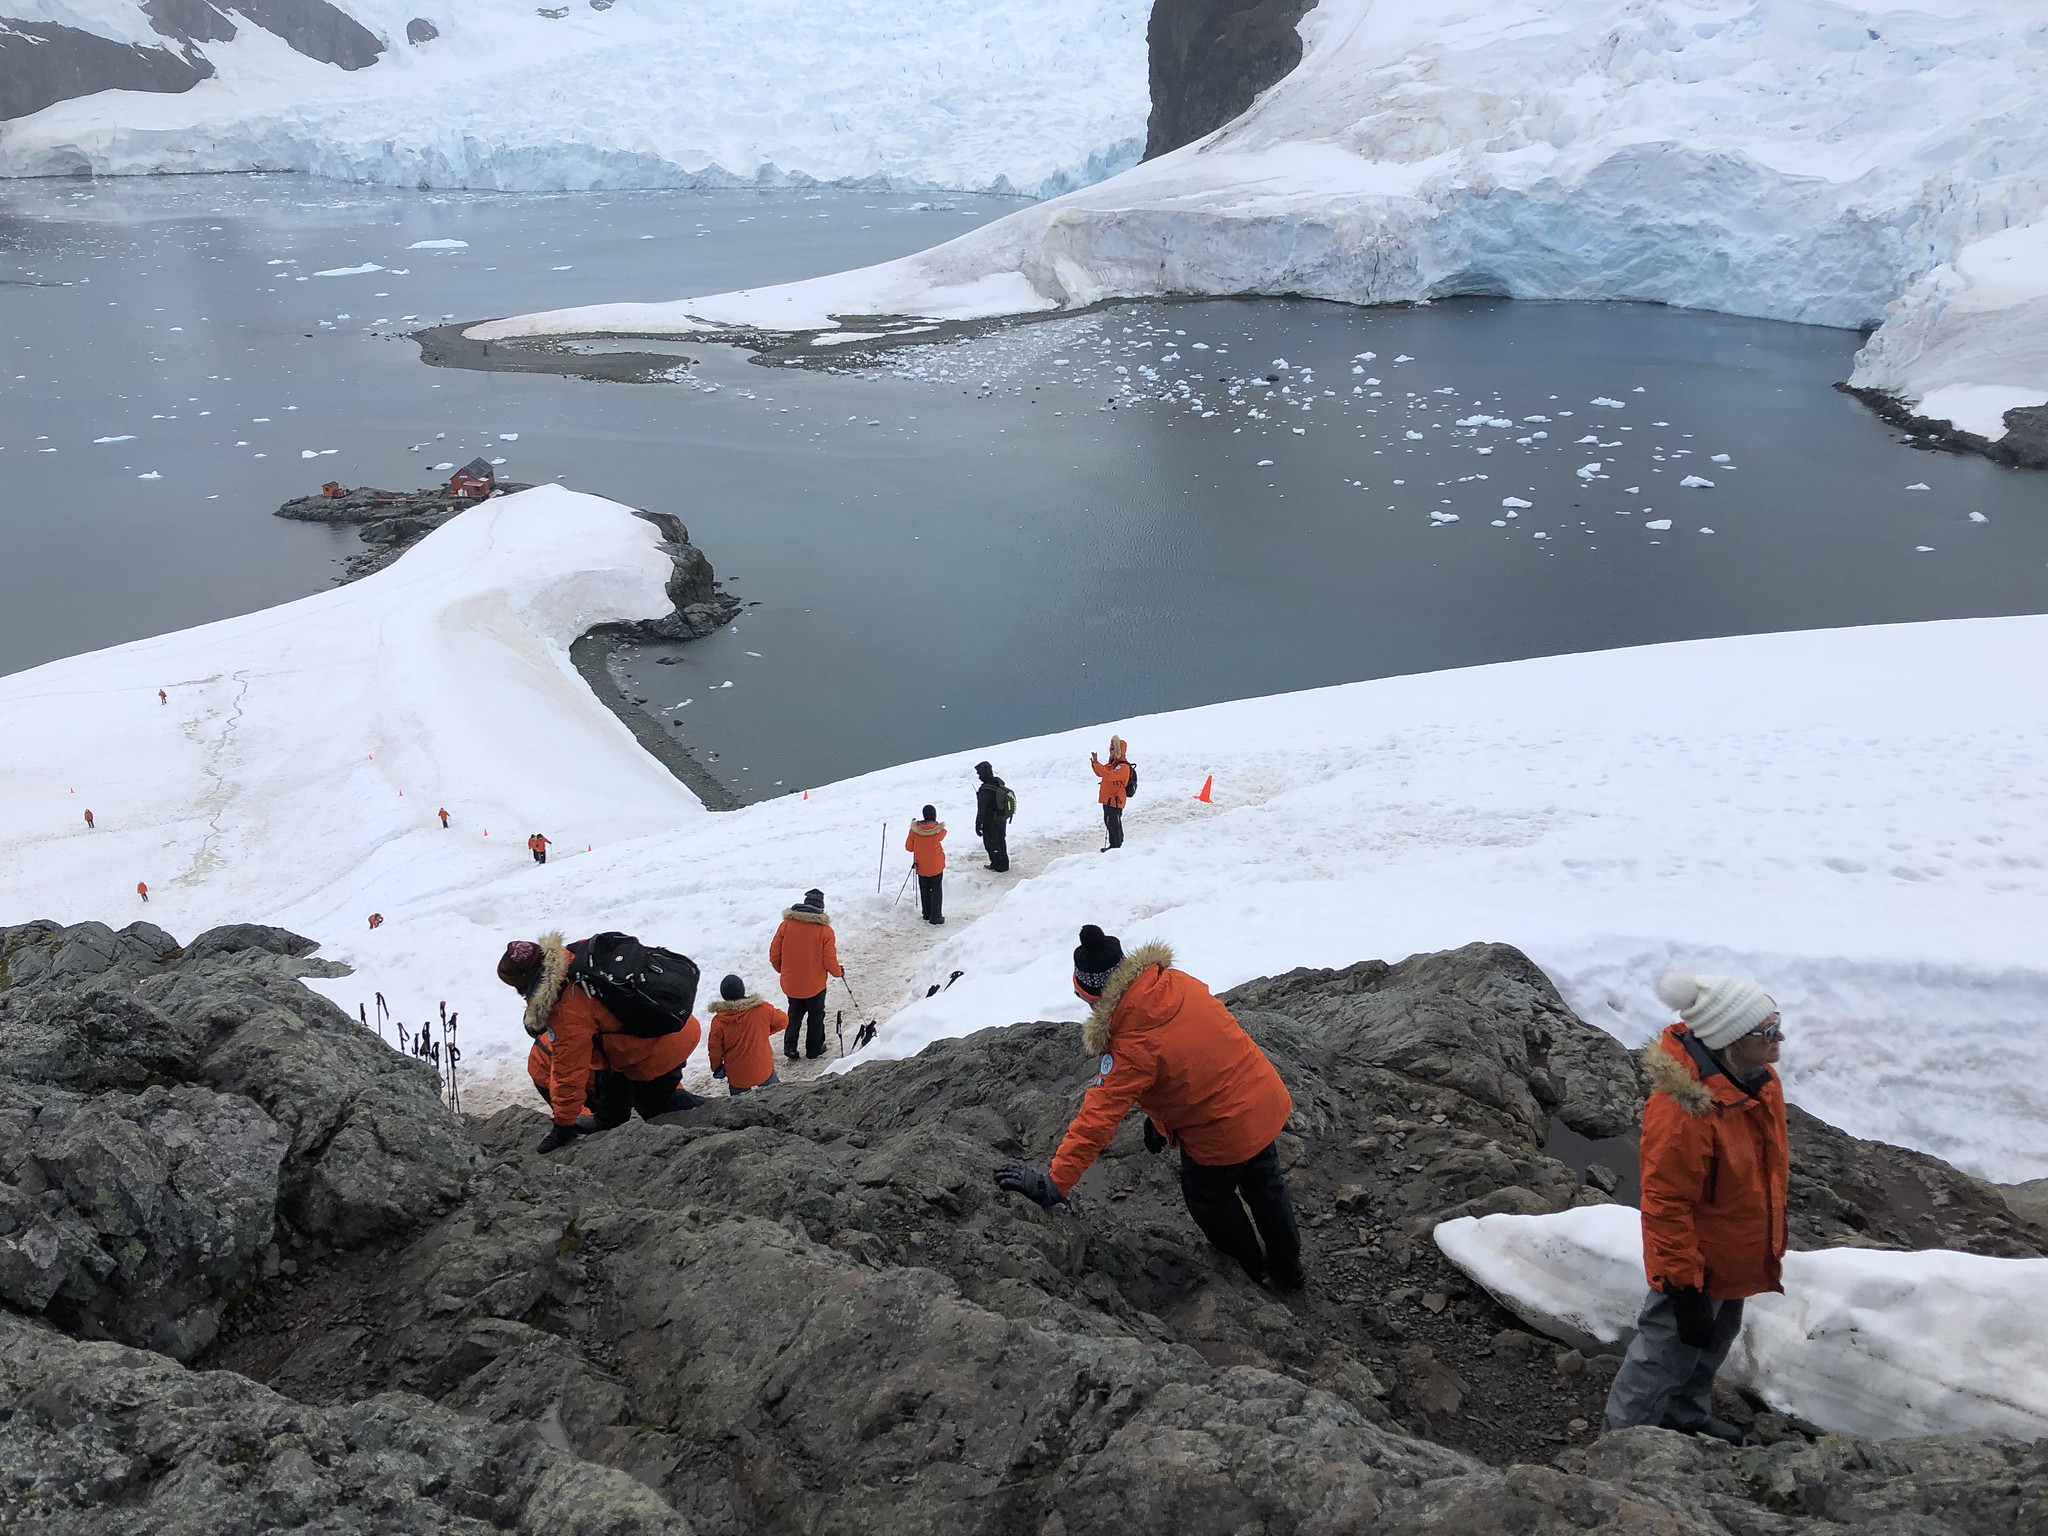 Life on Antarctic stations and in field camps is communal in all aspects. : ‘Walking toward the sea’ by National Snow and Ice Data Center via Flickr https://flic.kr/p/2jv6y4Q CC-BY-2.0